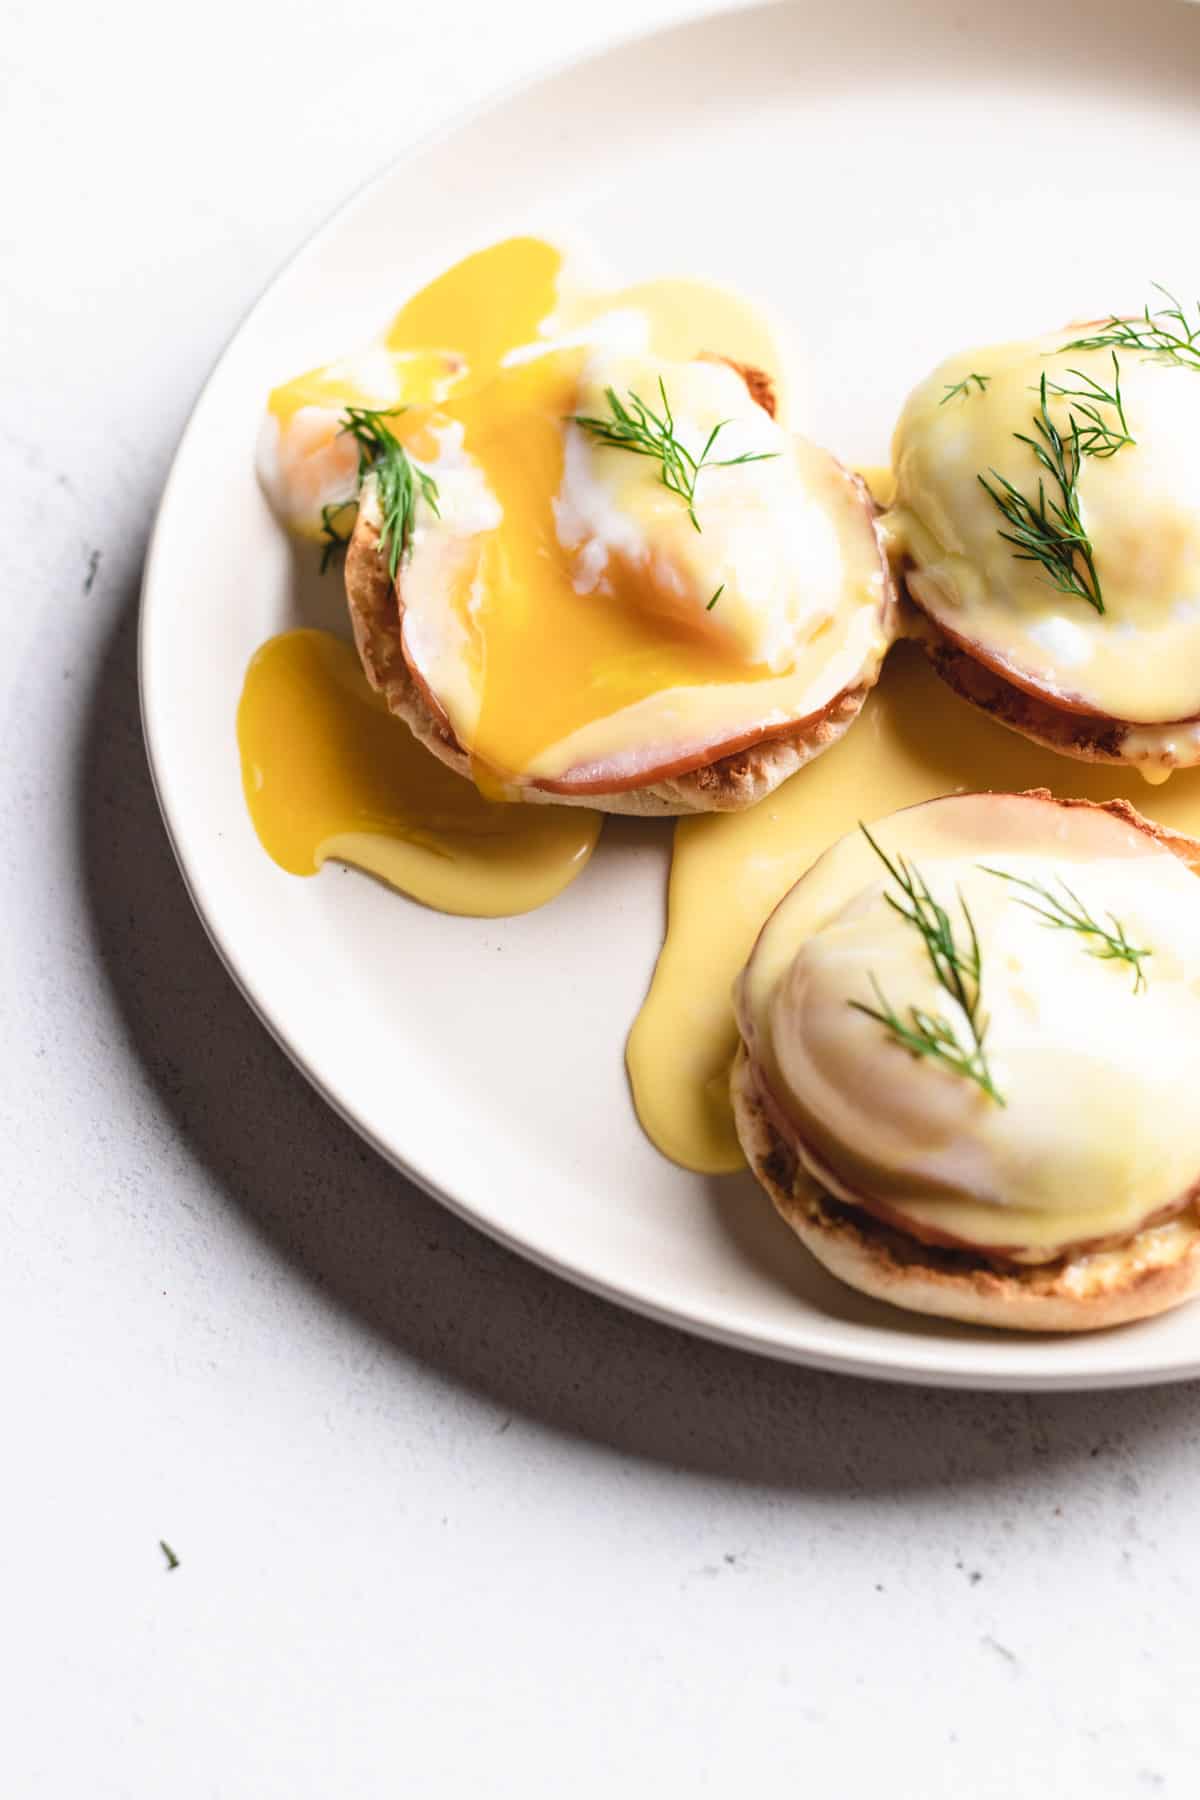 Close up photo of eggs benedict with a broken yolk.